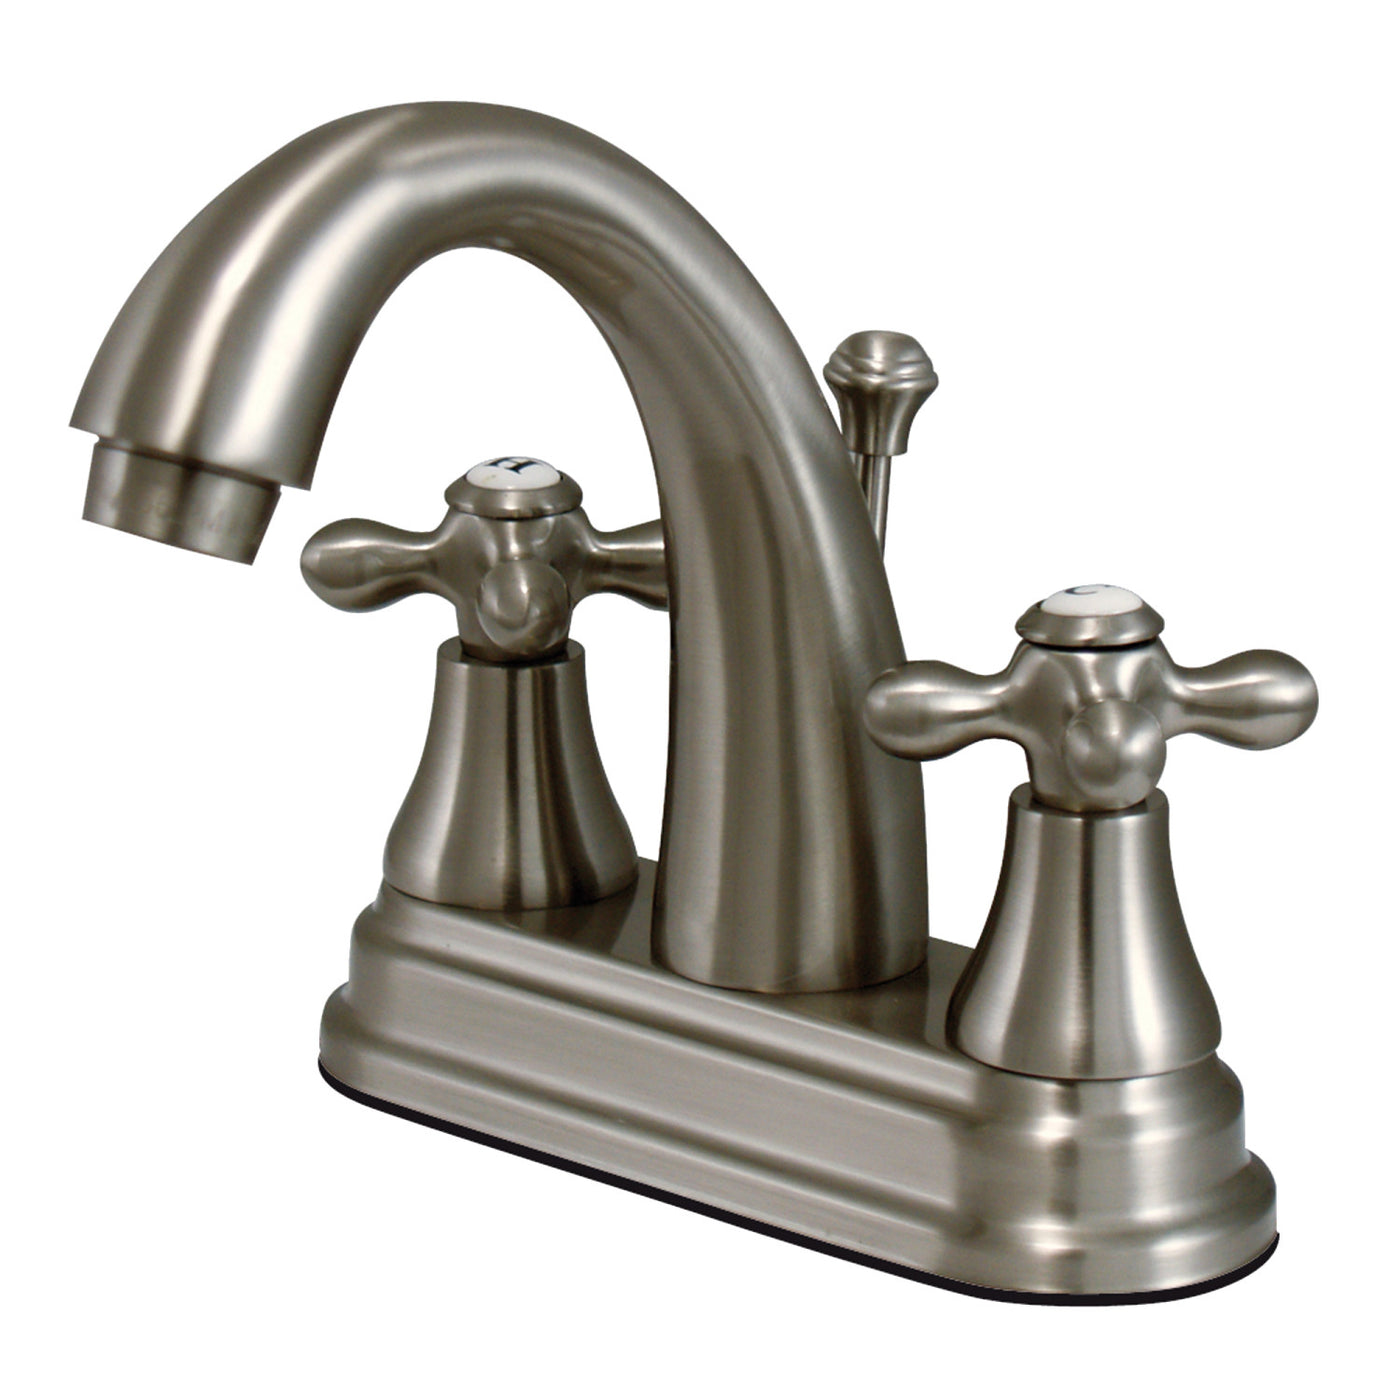 Elements of Design ES7618AX 4-Inch Centerset Bathroom Faucet with Brass Pop-Up, Brushed Nickel